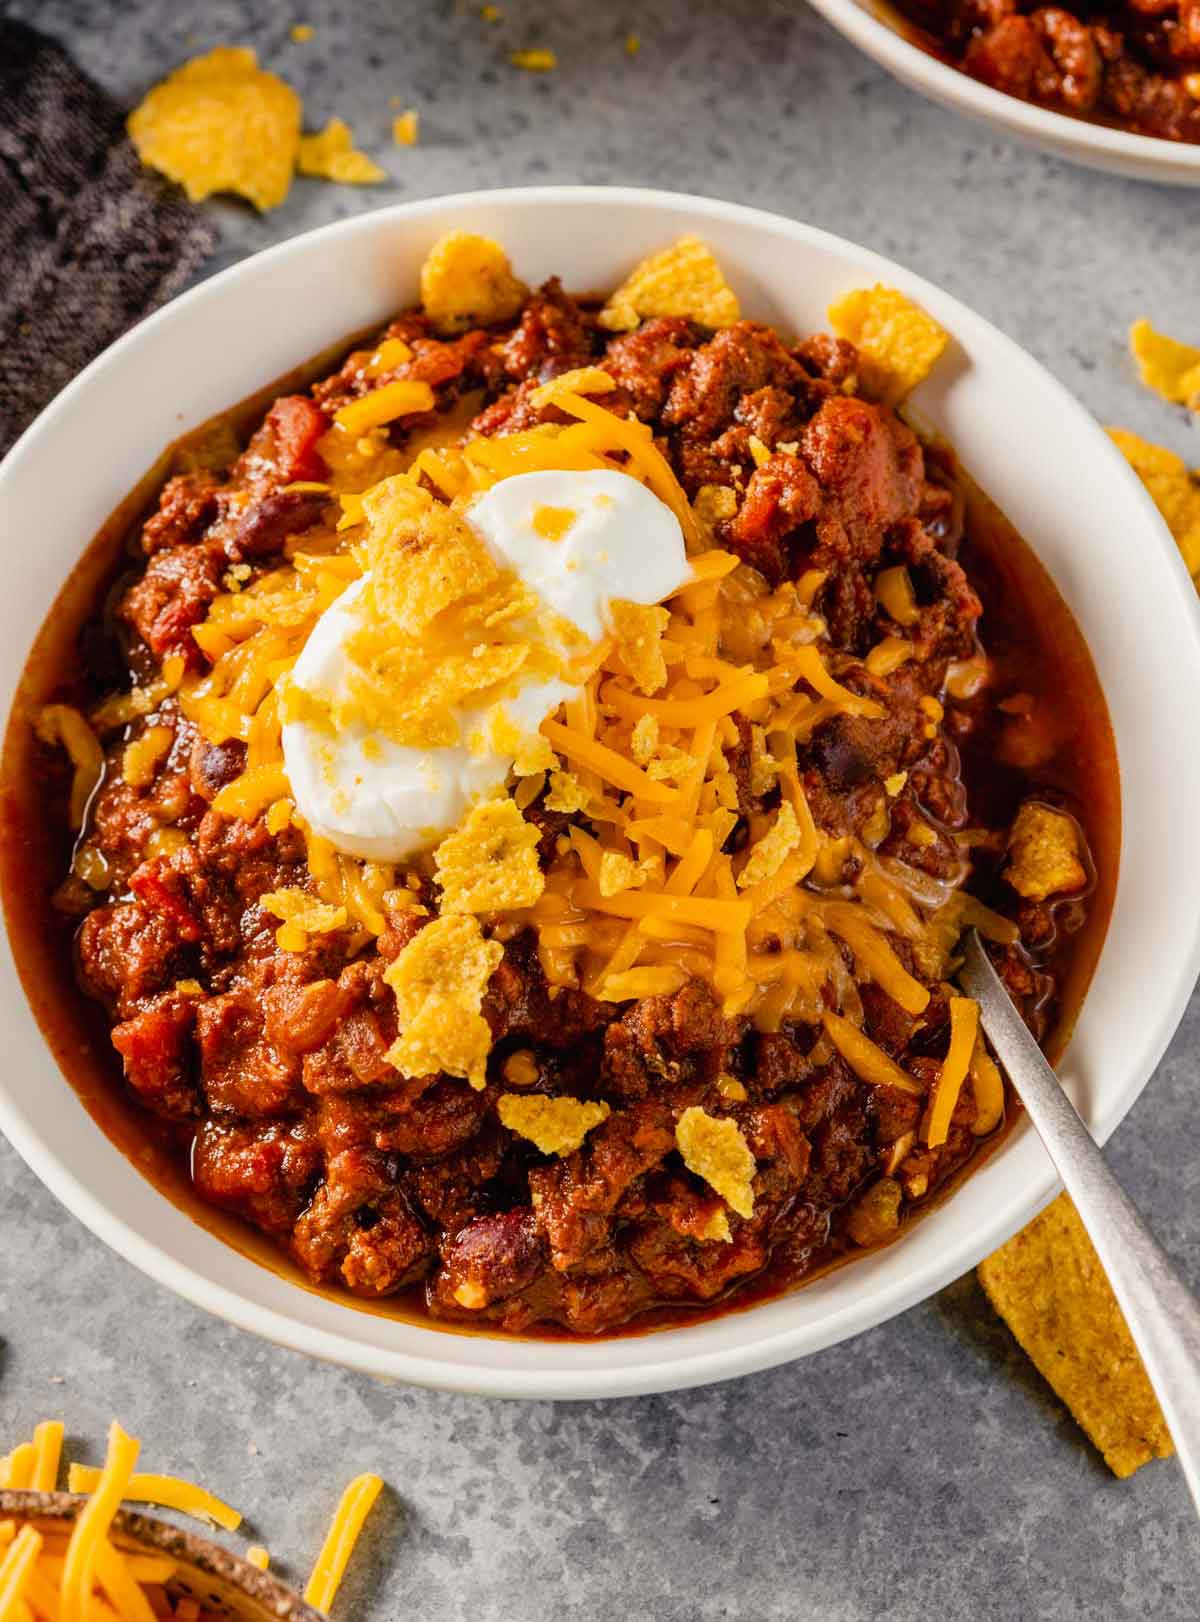 A close up photo of beef chili in a white bowl topped with shredded cheese, sour cream, and corn chips.